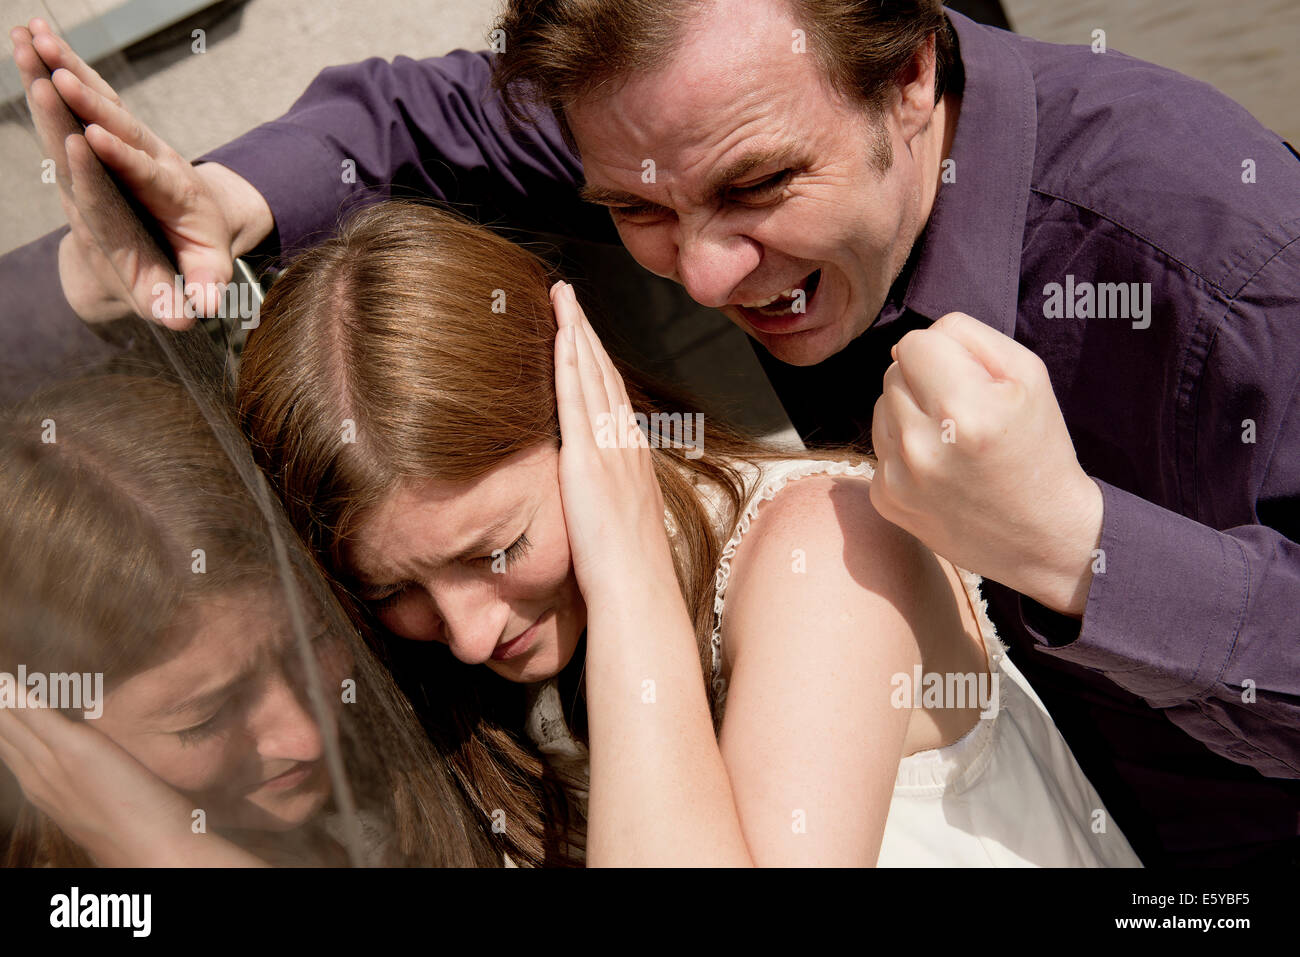 Aggressive man lashing out on a frightened woman with tirade of verbal abuse and threatening behaviour. Stock Photo